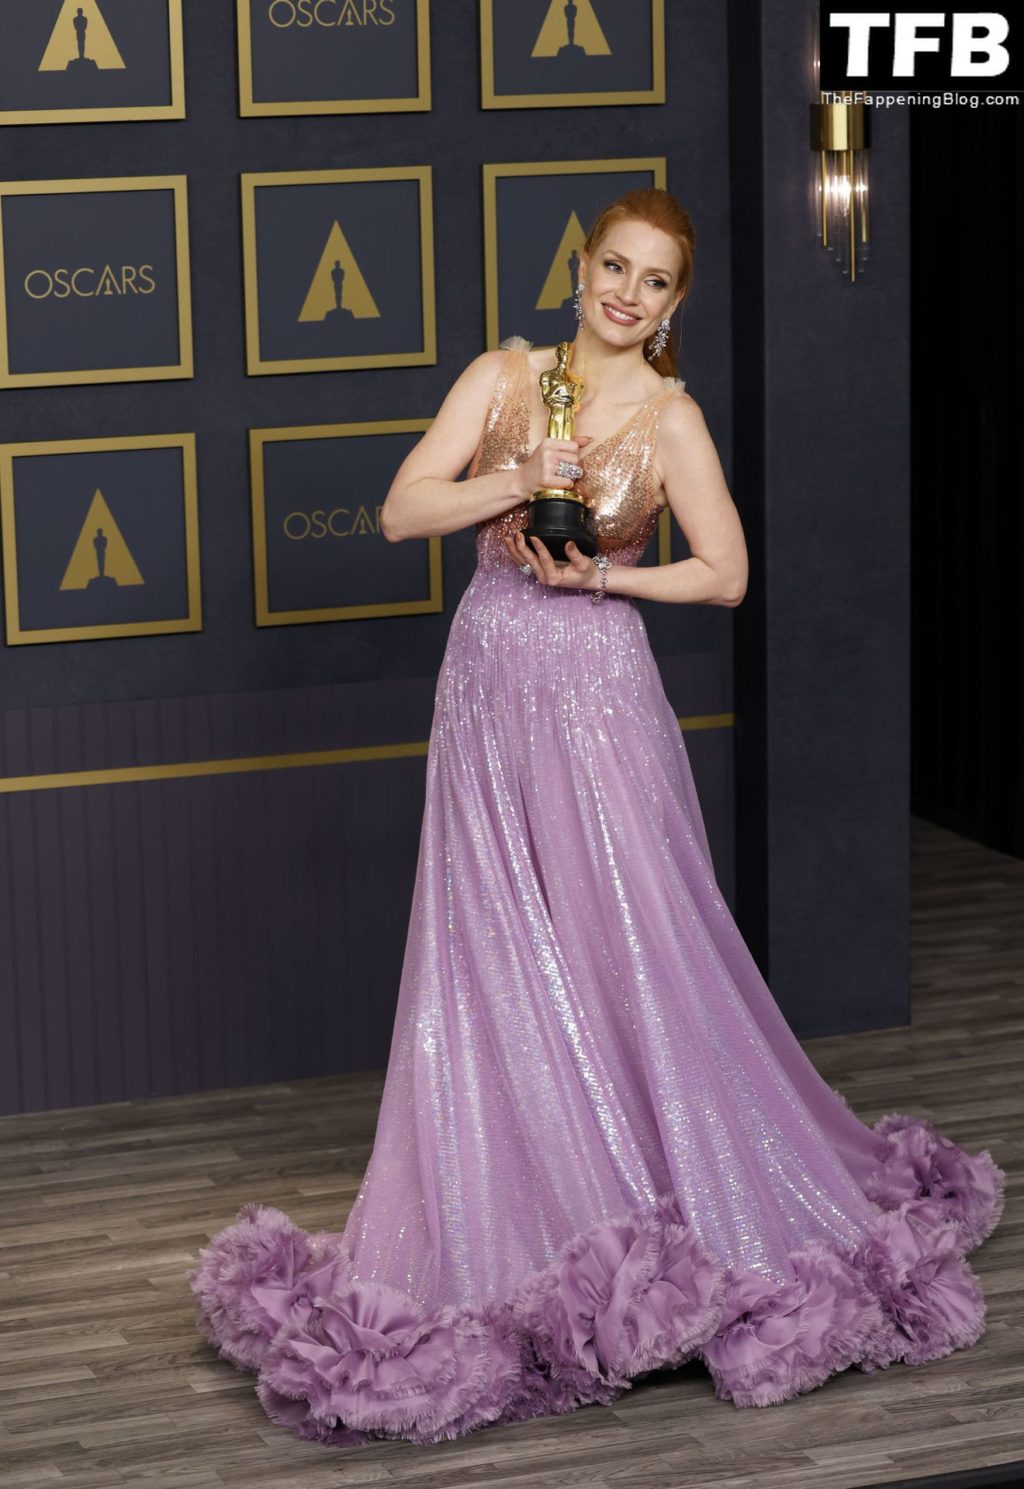 Jessica Chastain Sexy The Fappening Blog 57 1 1024x1489 - Jessica Chastain Poses With Her Oscar at the 94th Academy Awards (150 Photos)